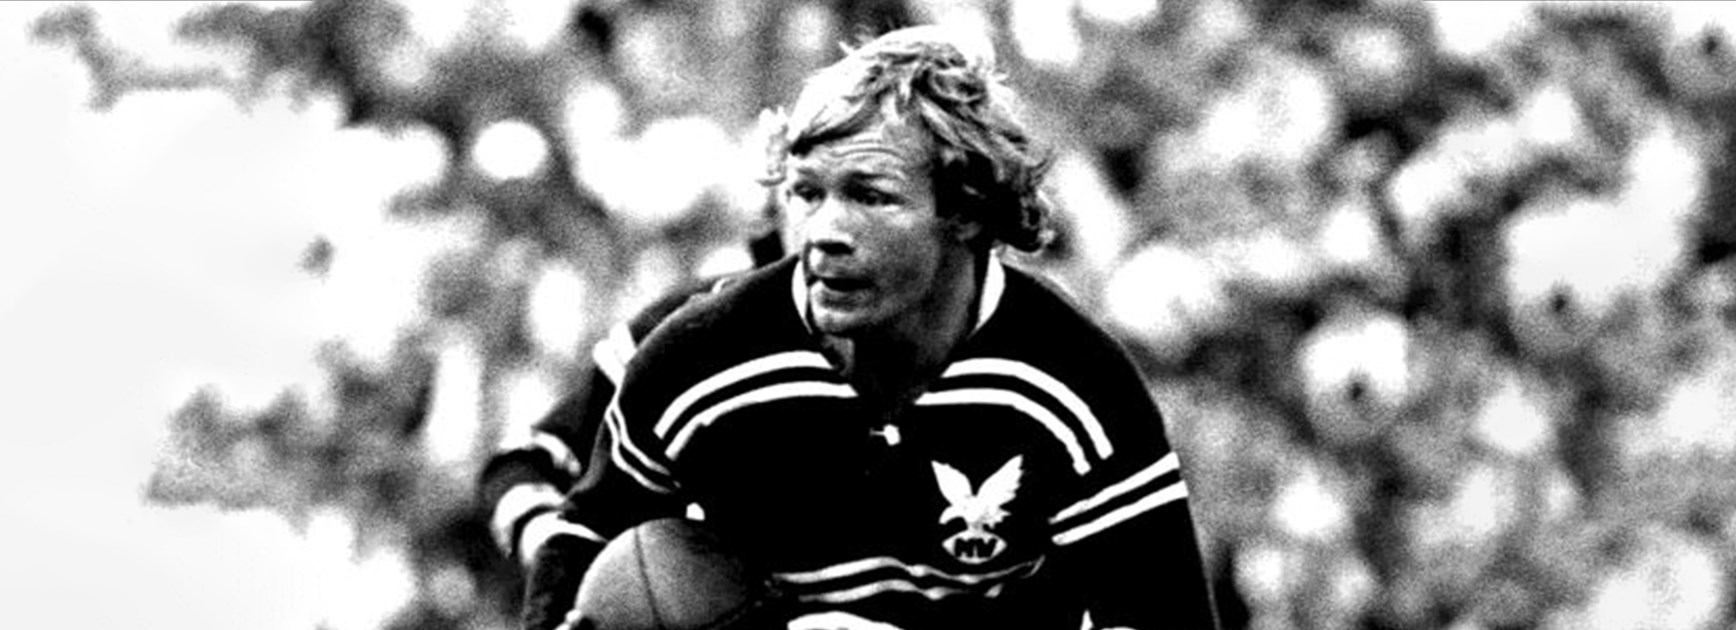 The great Bob Fulton is Manly's only Rugby League Immortal
